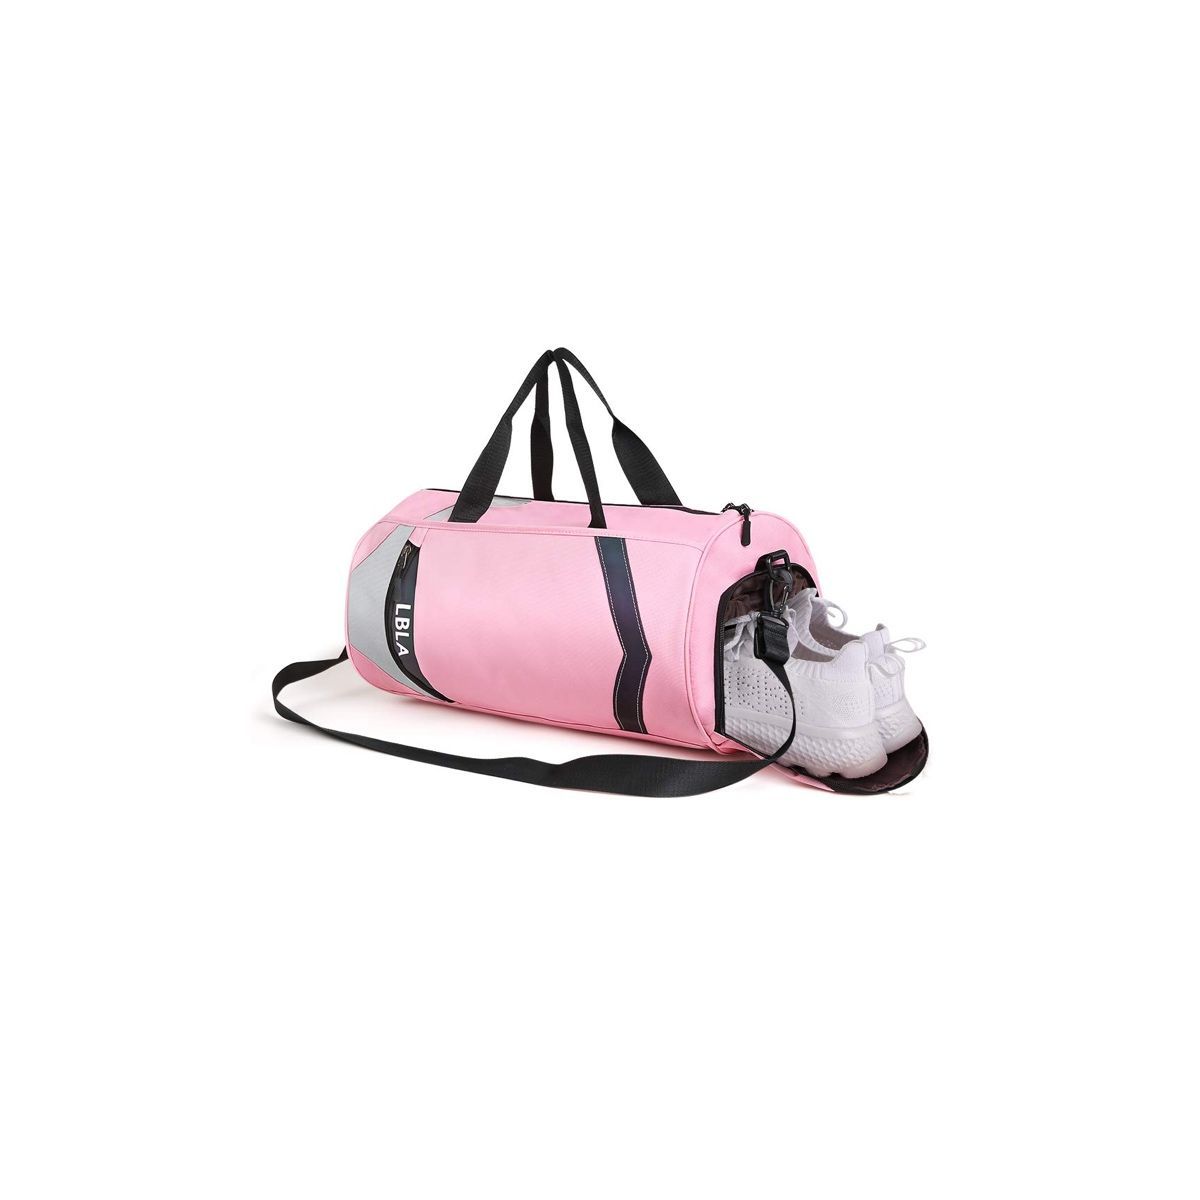 MUOOUM Pretty Deep Purple Tulip Flower Large Duffle Bags Sports Gym Bag with Shoes Compartment for Men and Women 